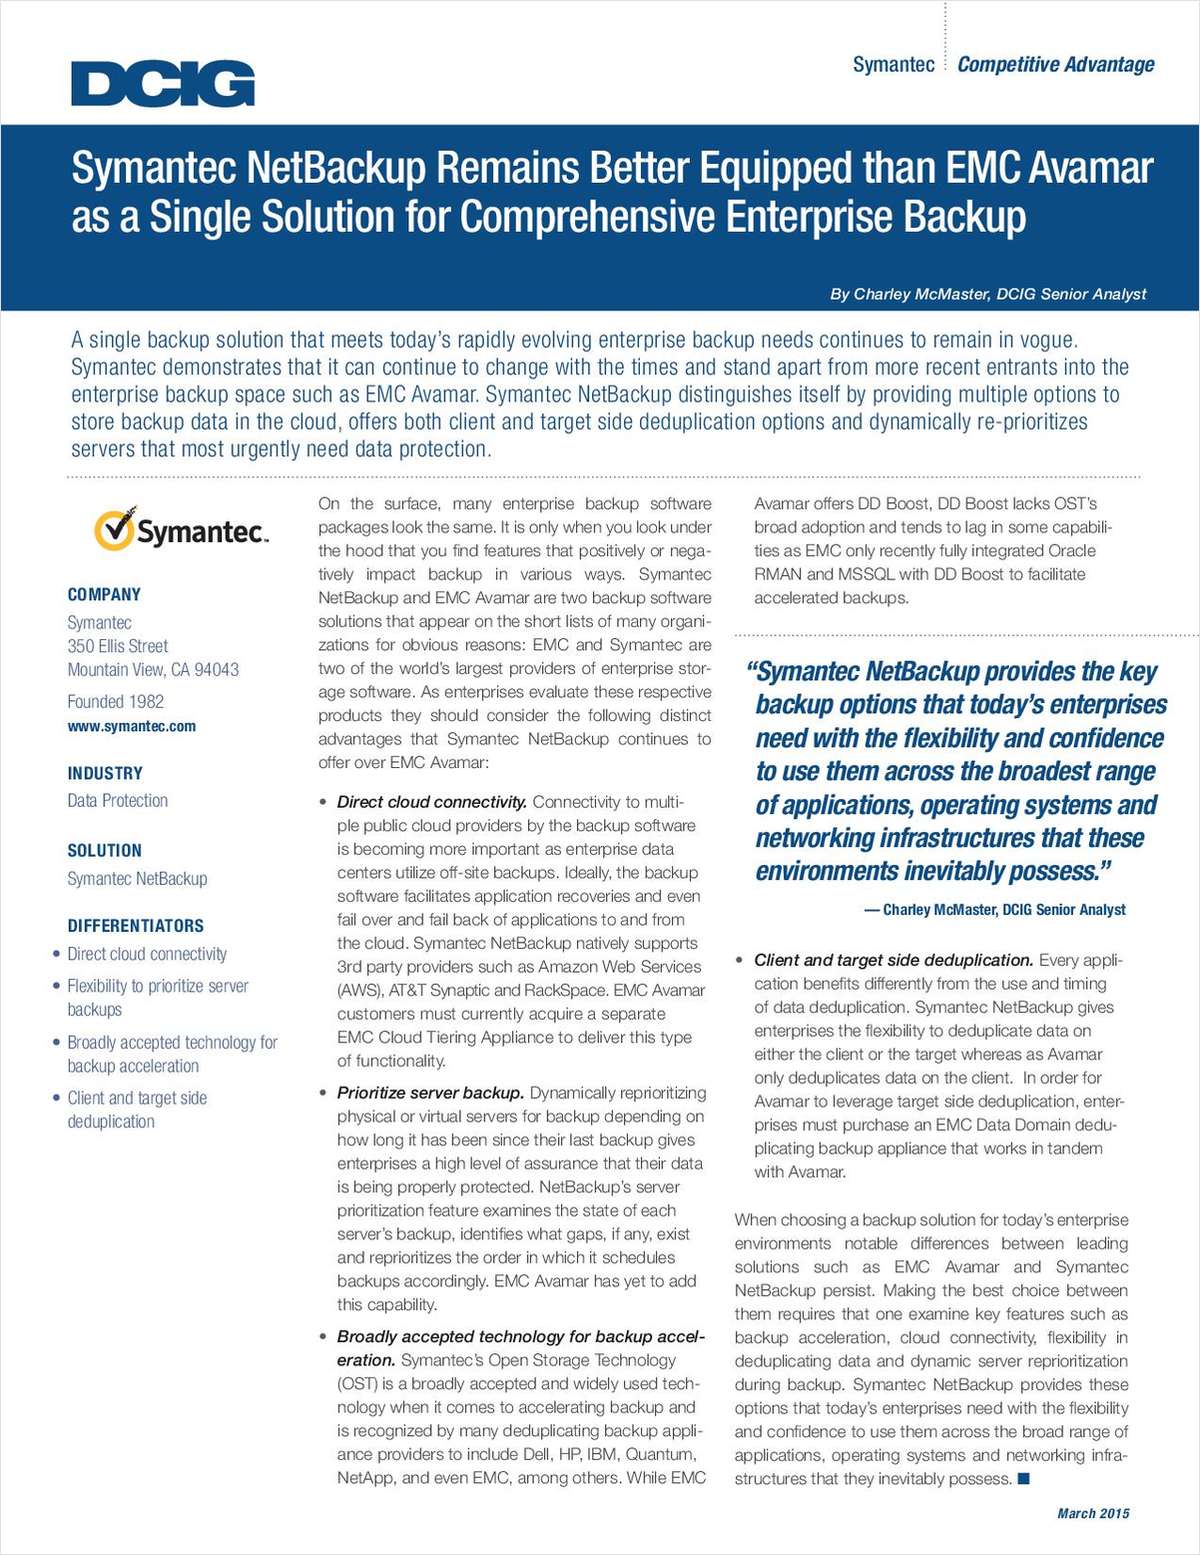 Symantec NetBackup Remains Better Equipped than EMC Avamar as a Single Solution for Comprehensive Enterprise Backup